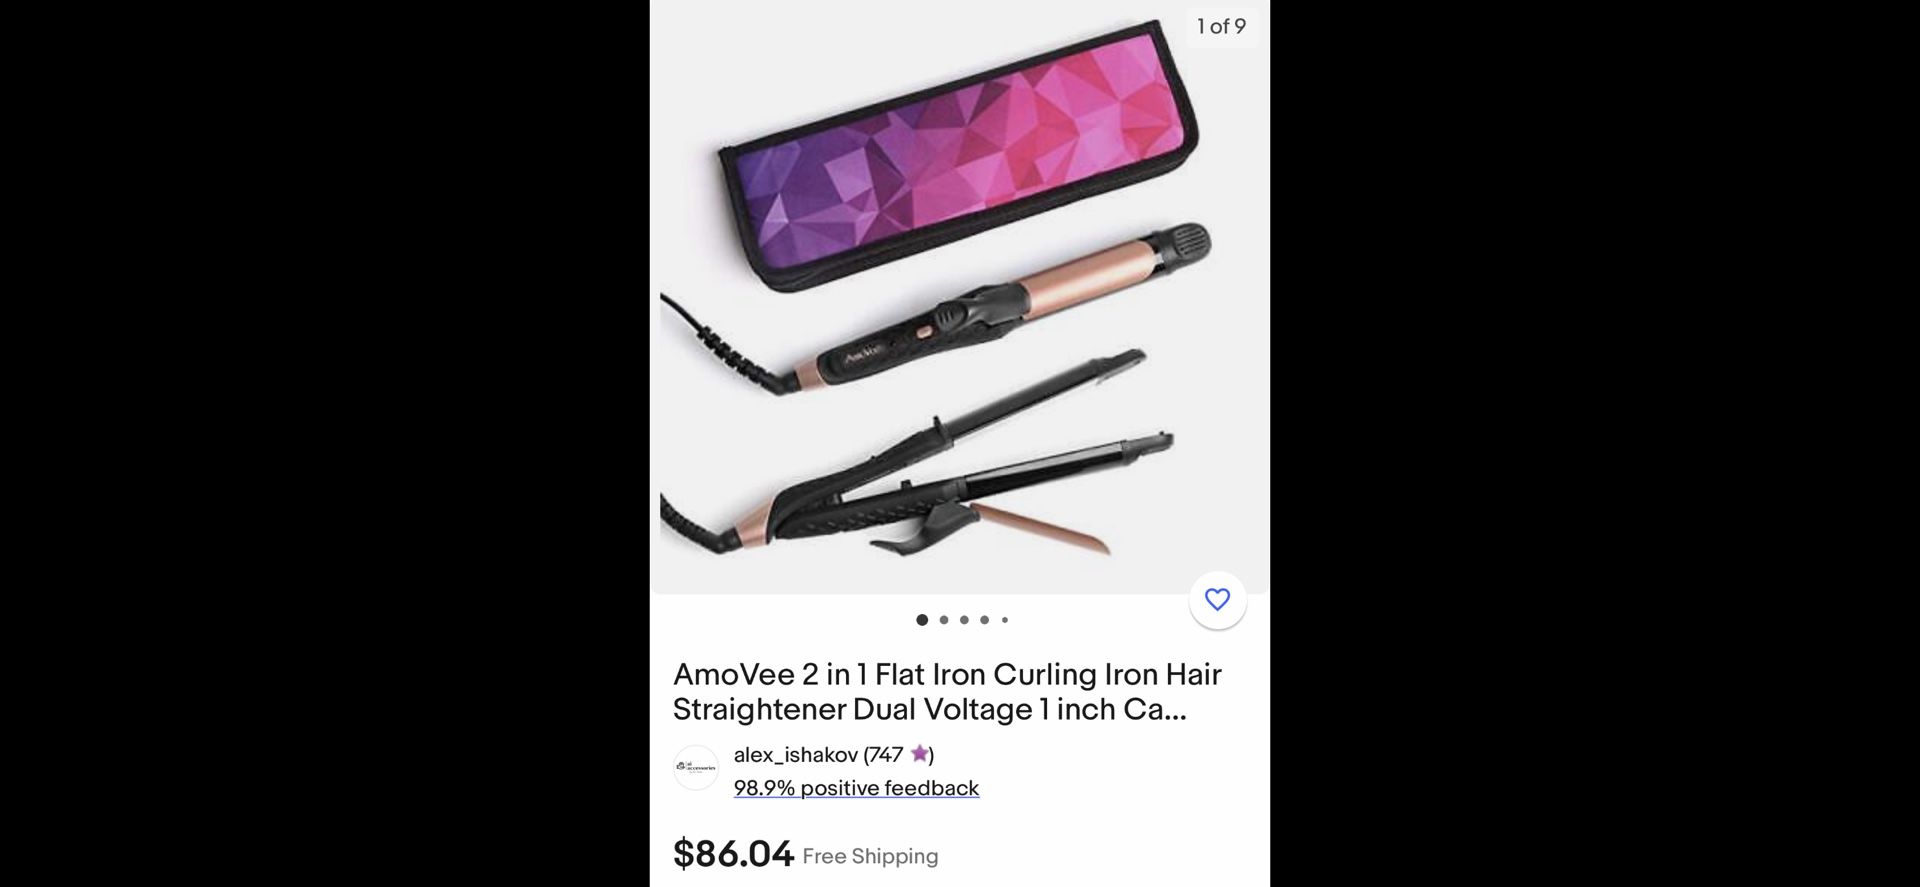 AmoVee 2 in 1 Flat Iron Curling Iron Hair Straightener Dual Voltage 1 inch